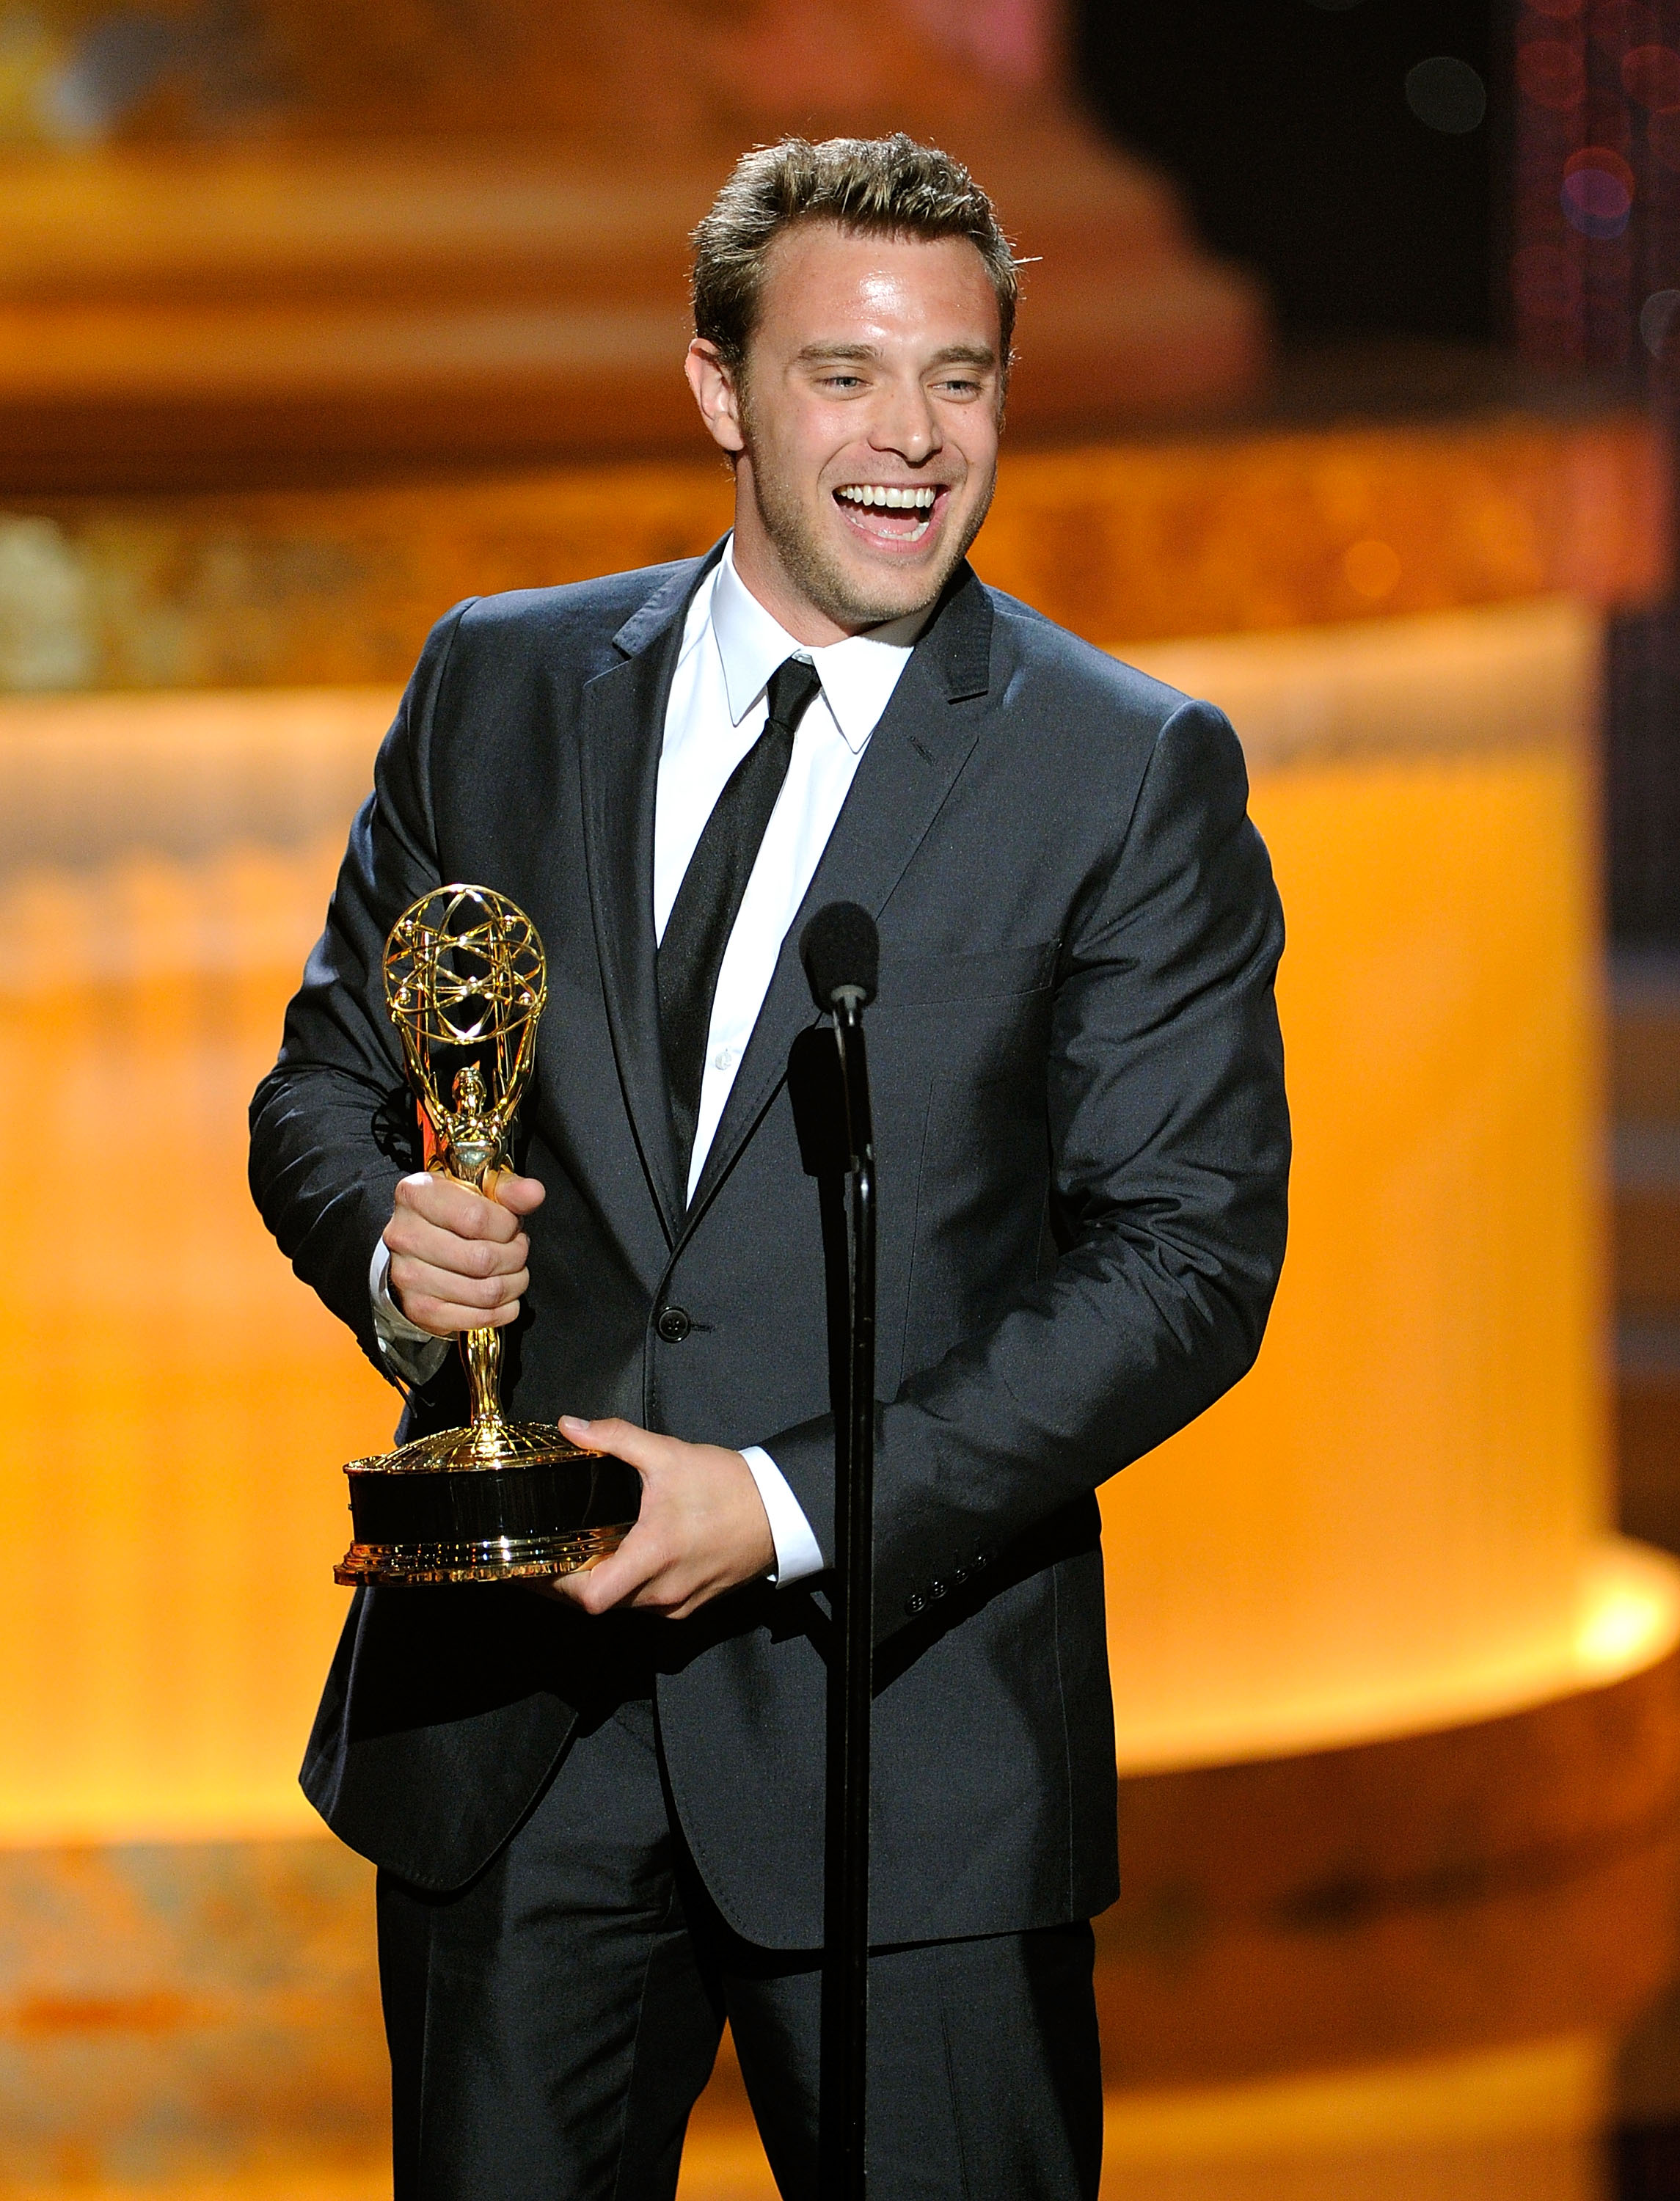 Billy Miller at the 37th Annual Daytime Entertainment Emmy Awards in Las Vegas, 2010 | Source: Getty Images